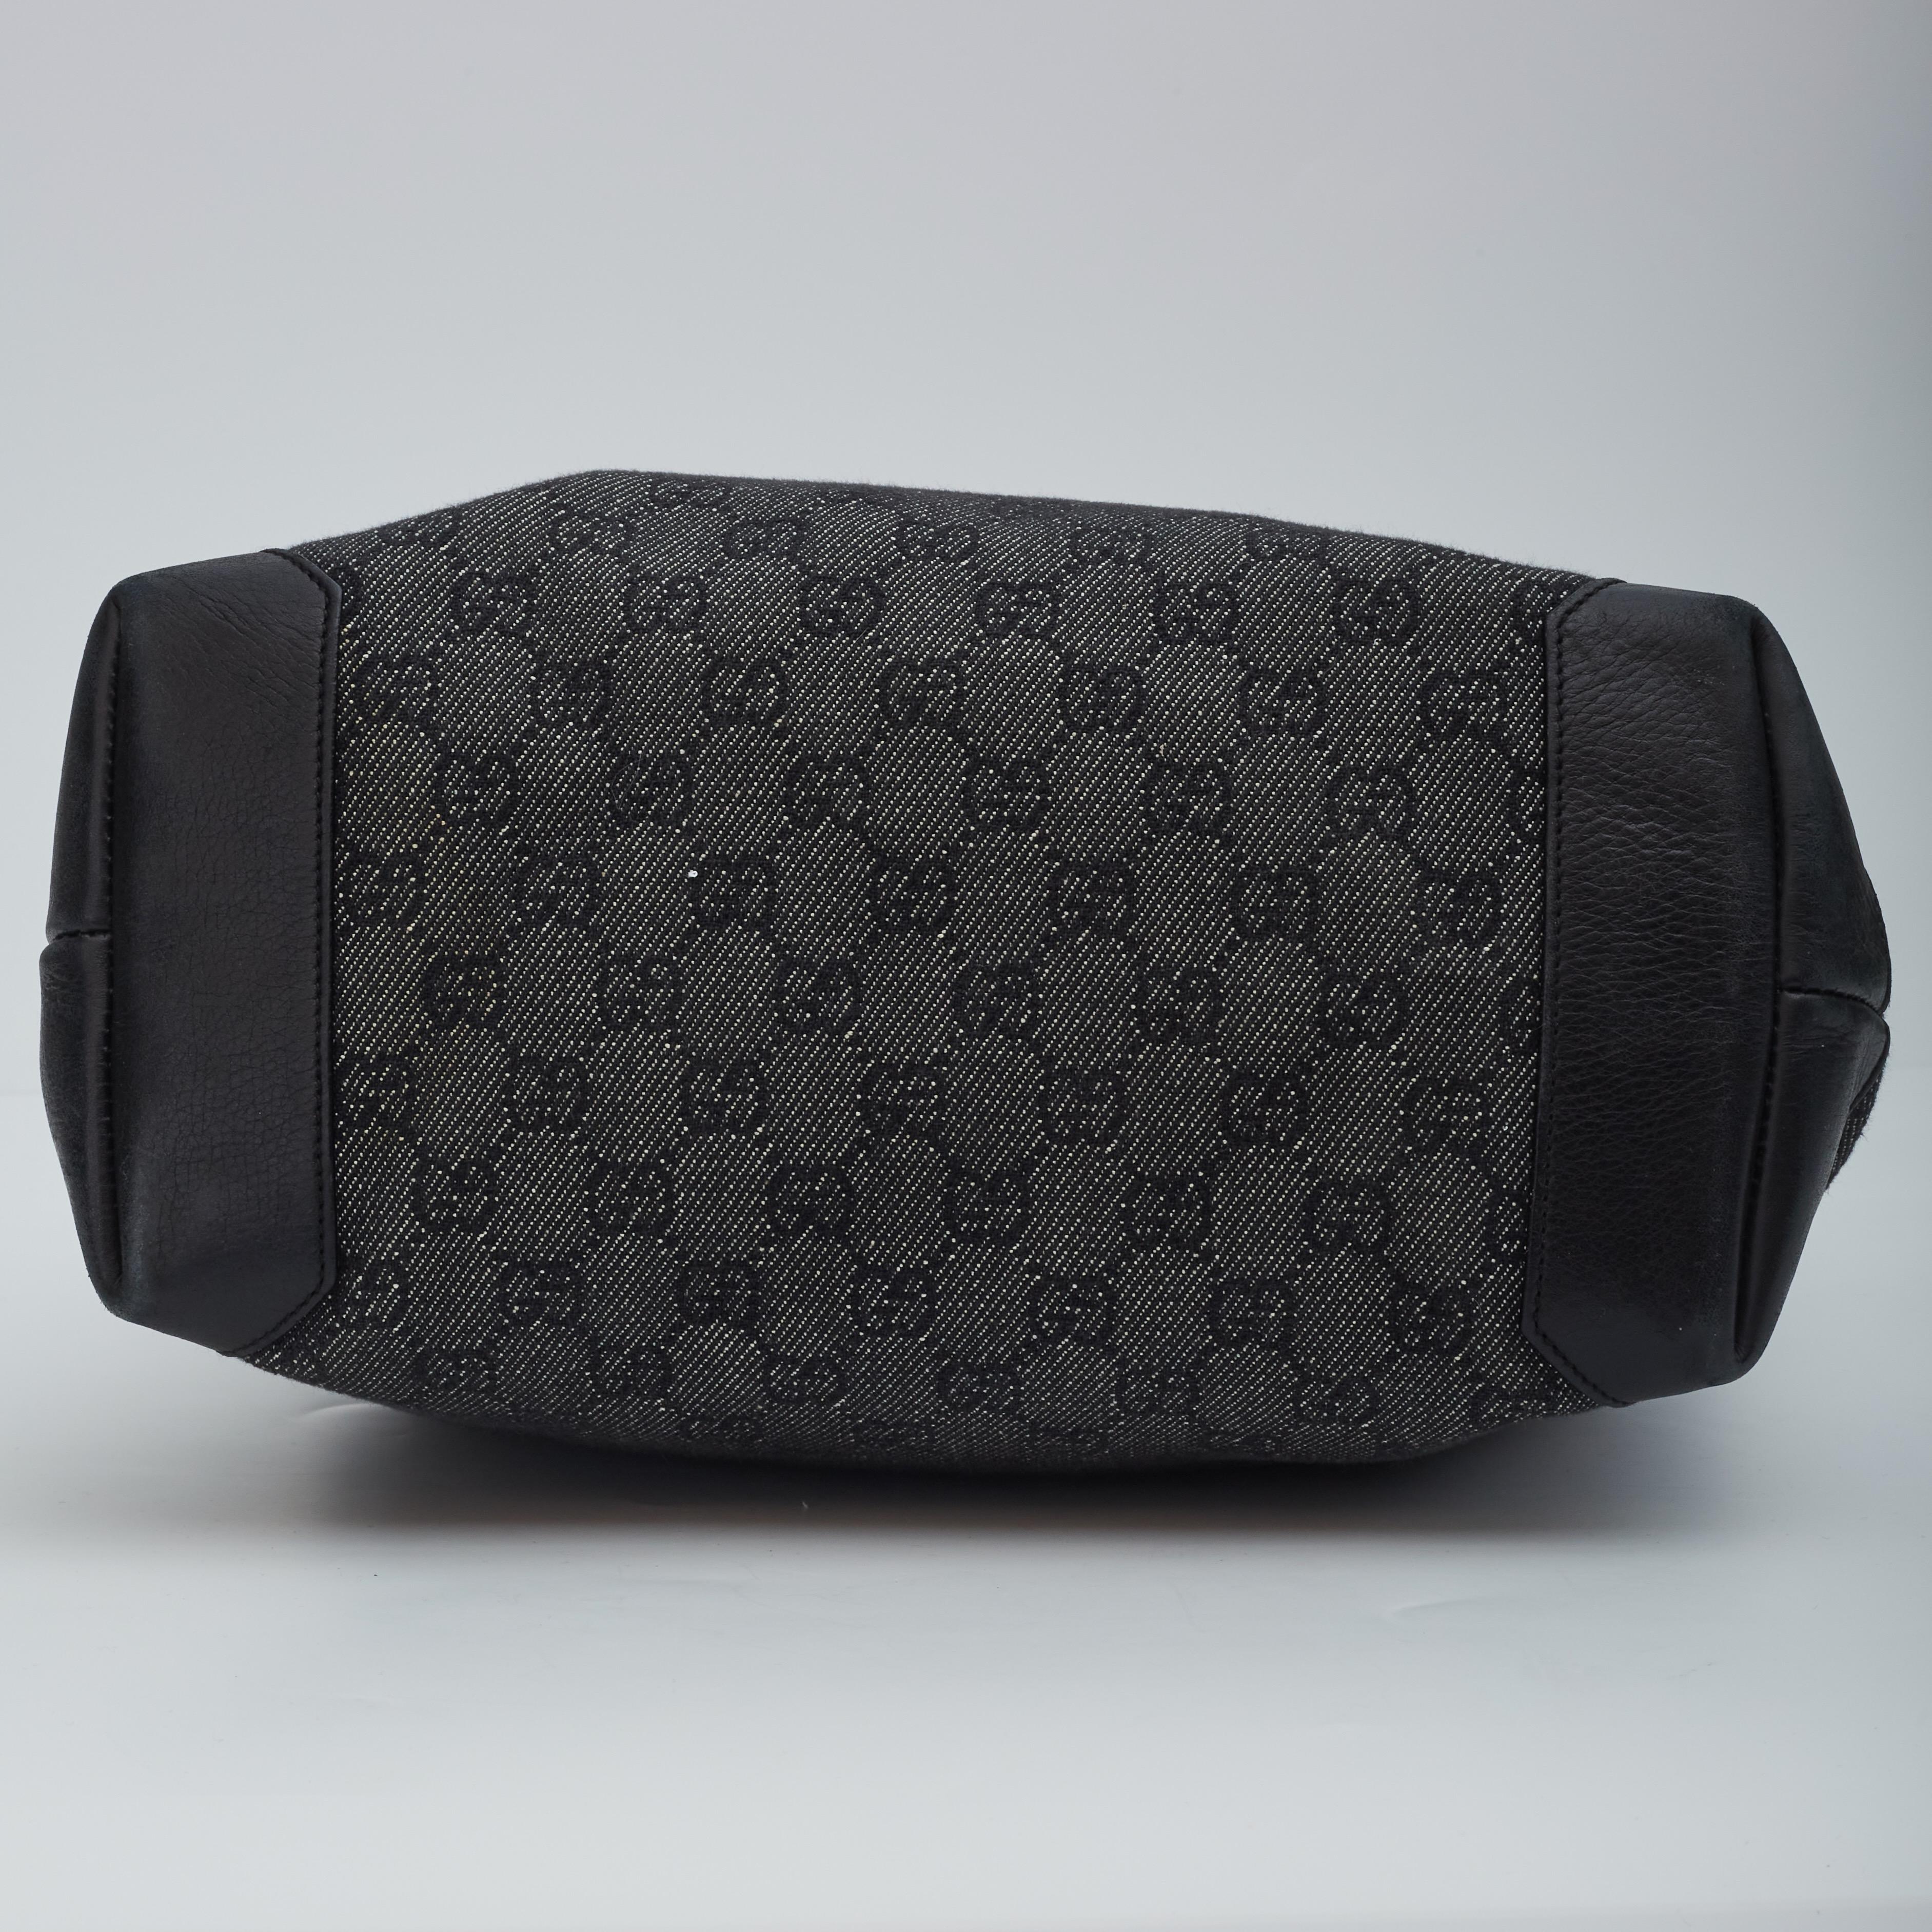 Gucci Monogram Black Canvas Tall Tote Bag (143423) In Excellent Condition For Sale In Montreal, Quebec